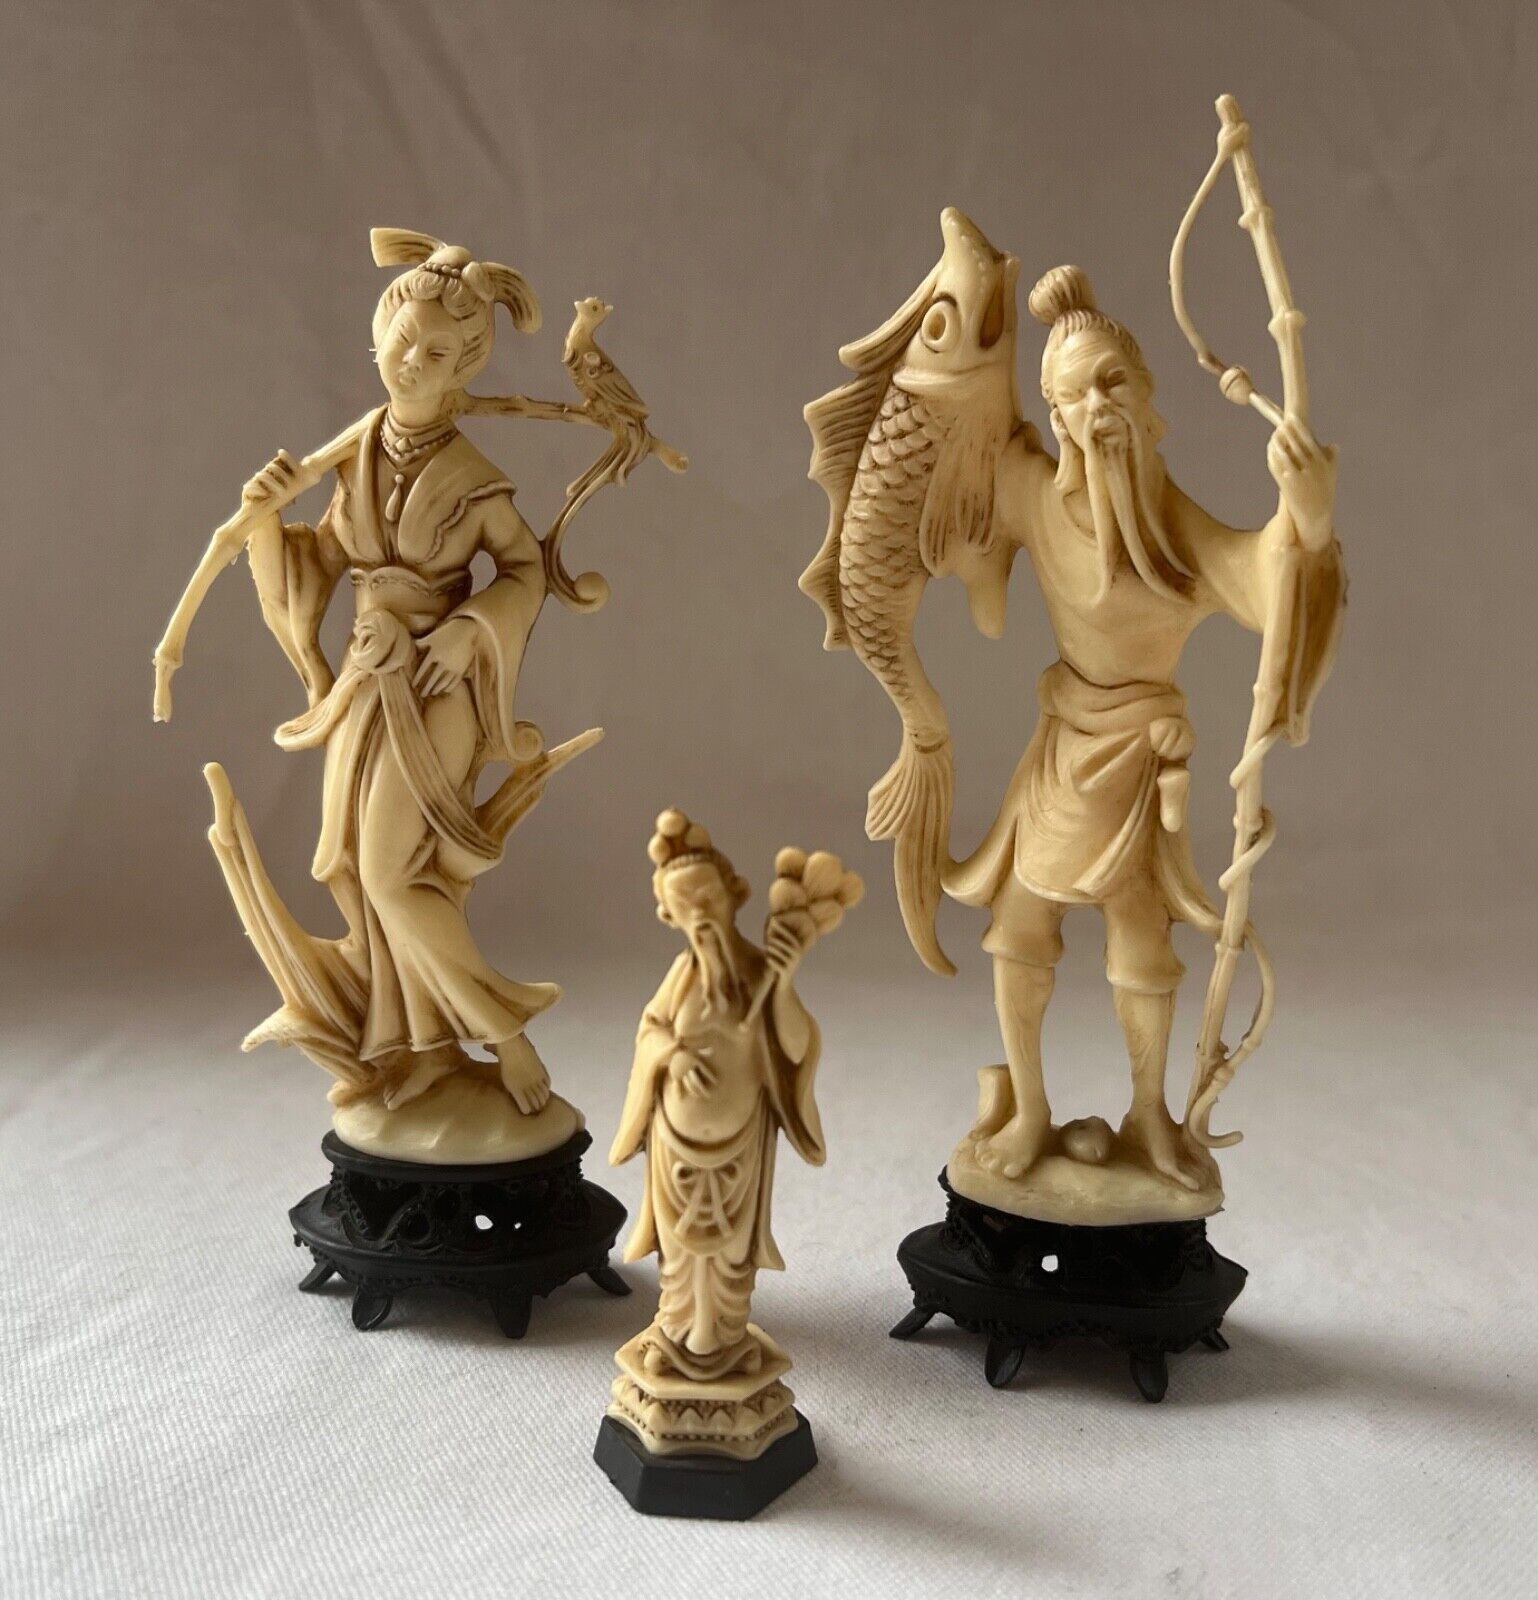 Vintage Asian Figures Made in Italy Resin on Stand (Free ship)